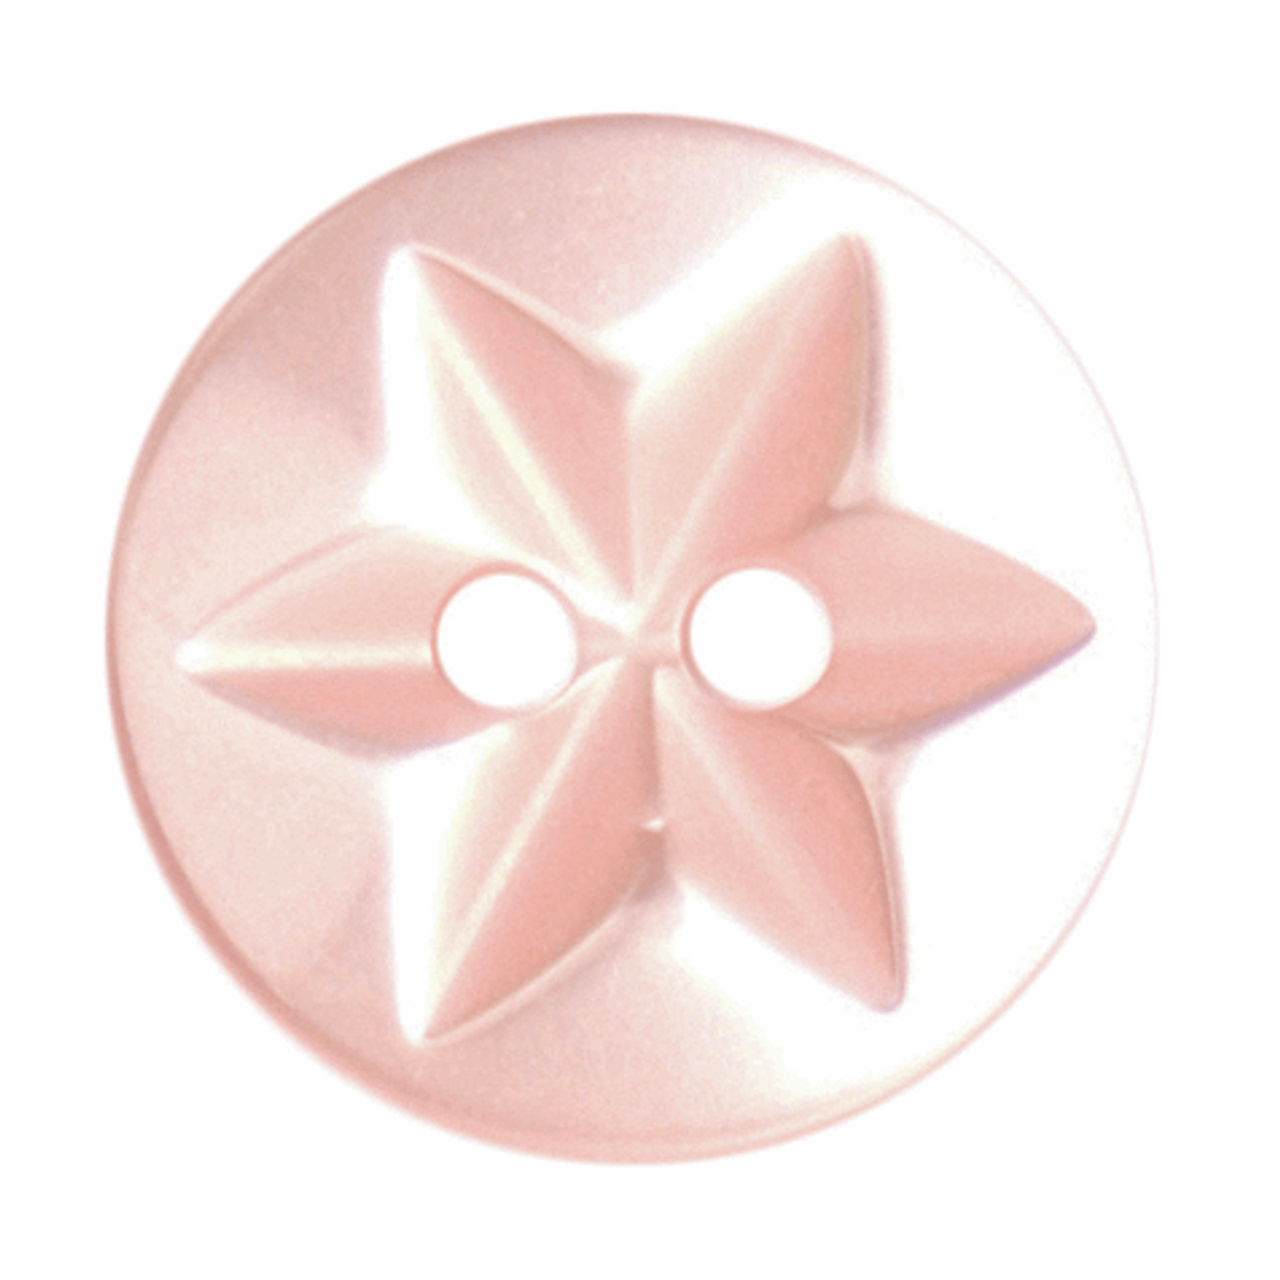 Pink Star Button, 15mm (9/16in) Diameter (Sold Individually)